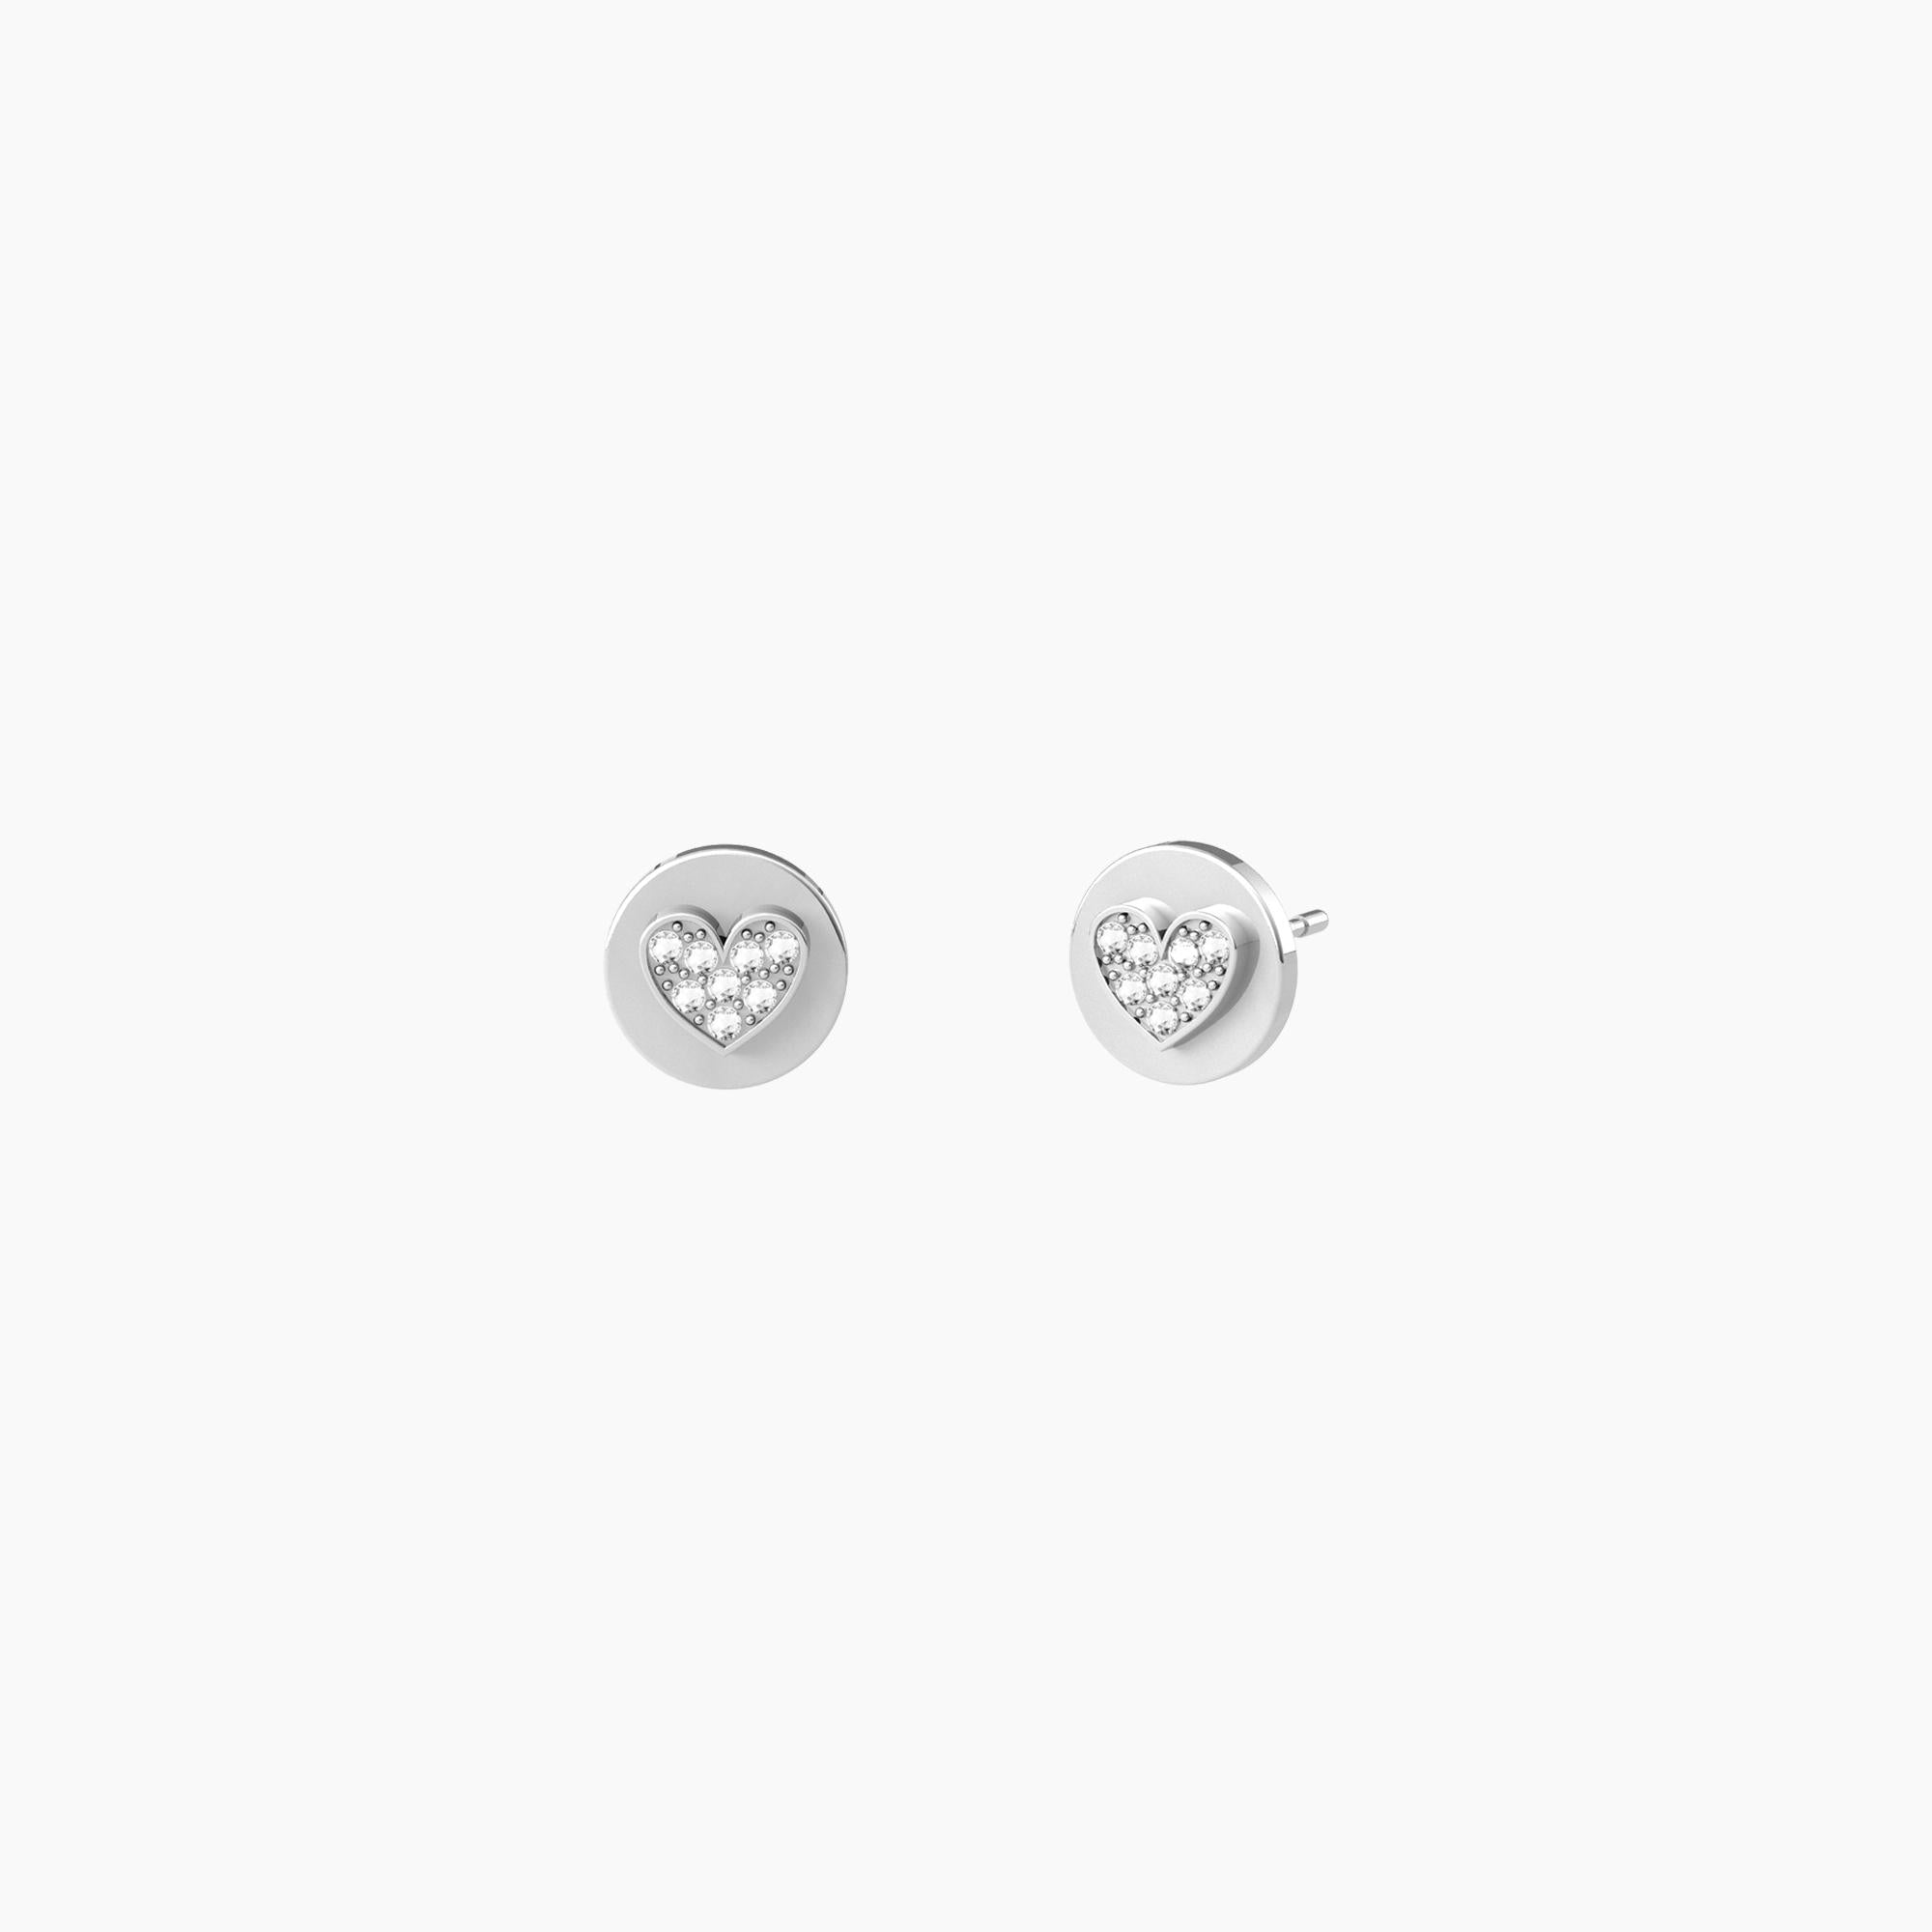 Round lobe earrings with hearts and white crystals
 HEARTS AND STARS - 761006